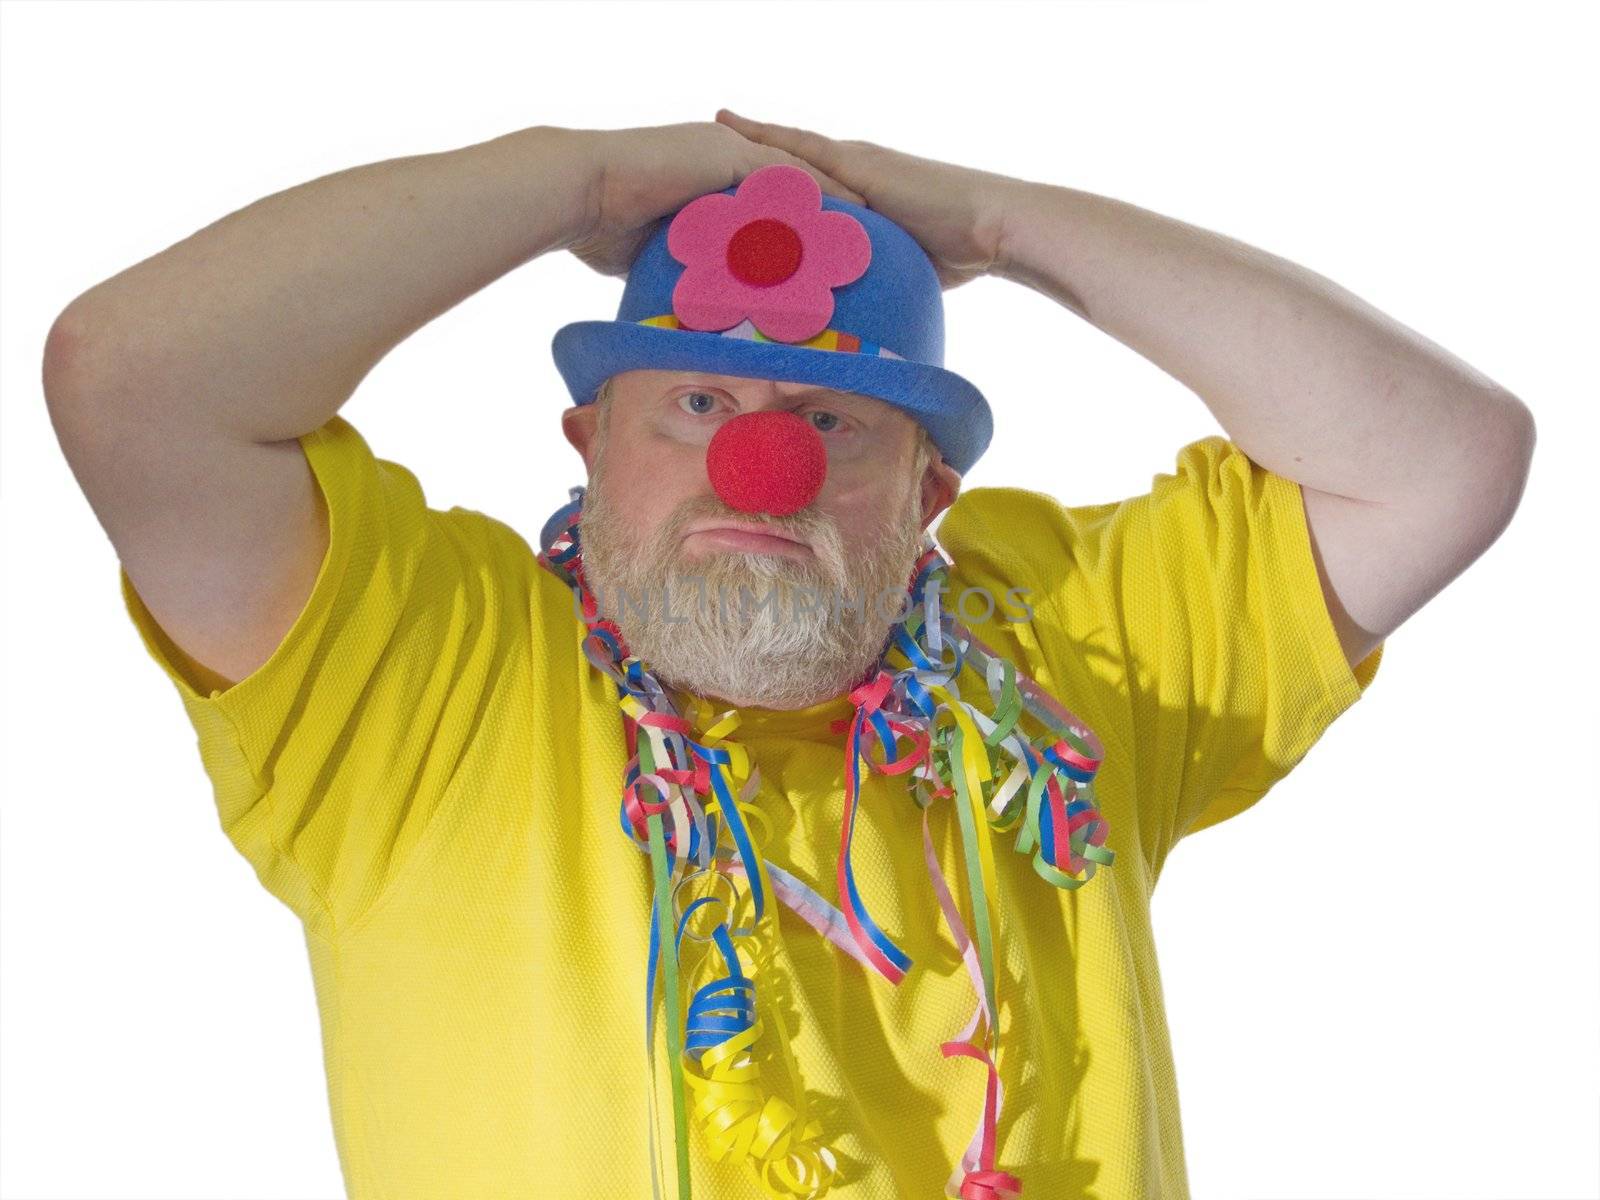 Clown with false nose by Teamarbeit